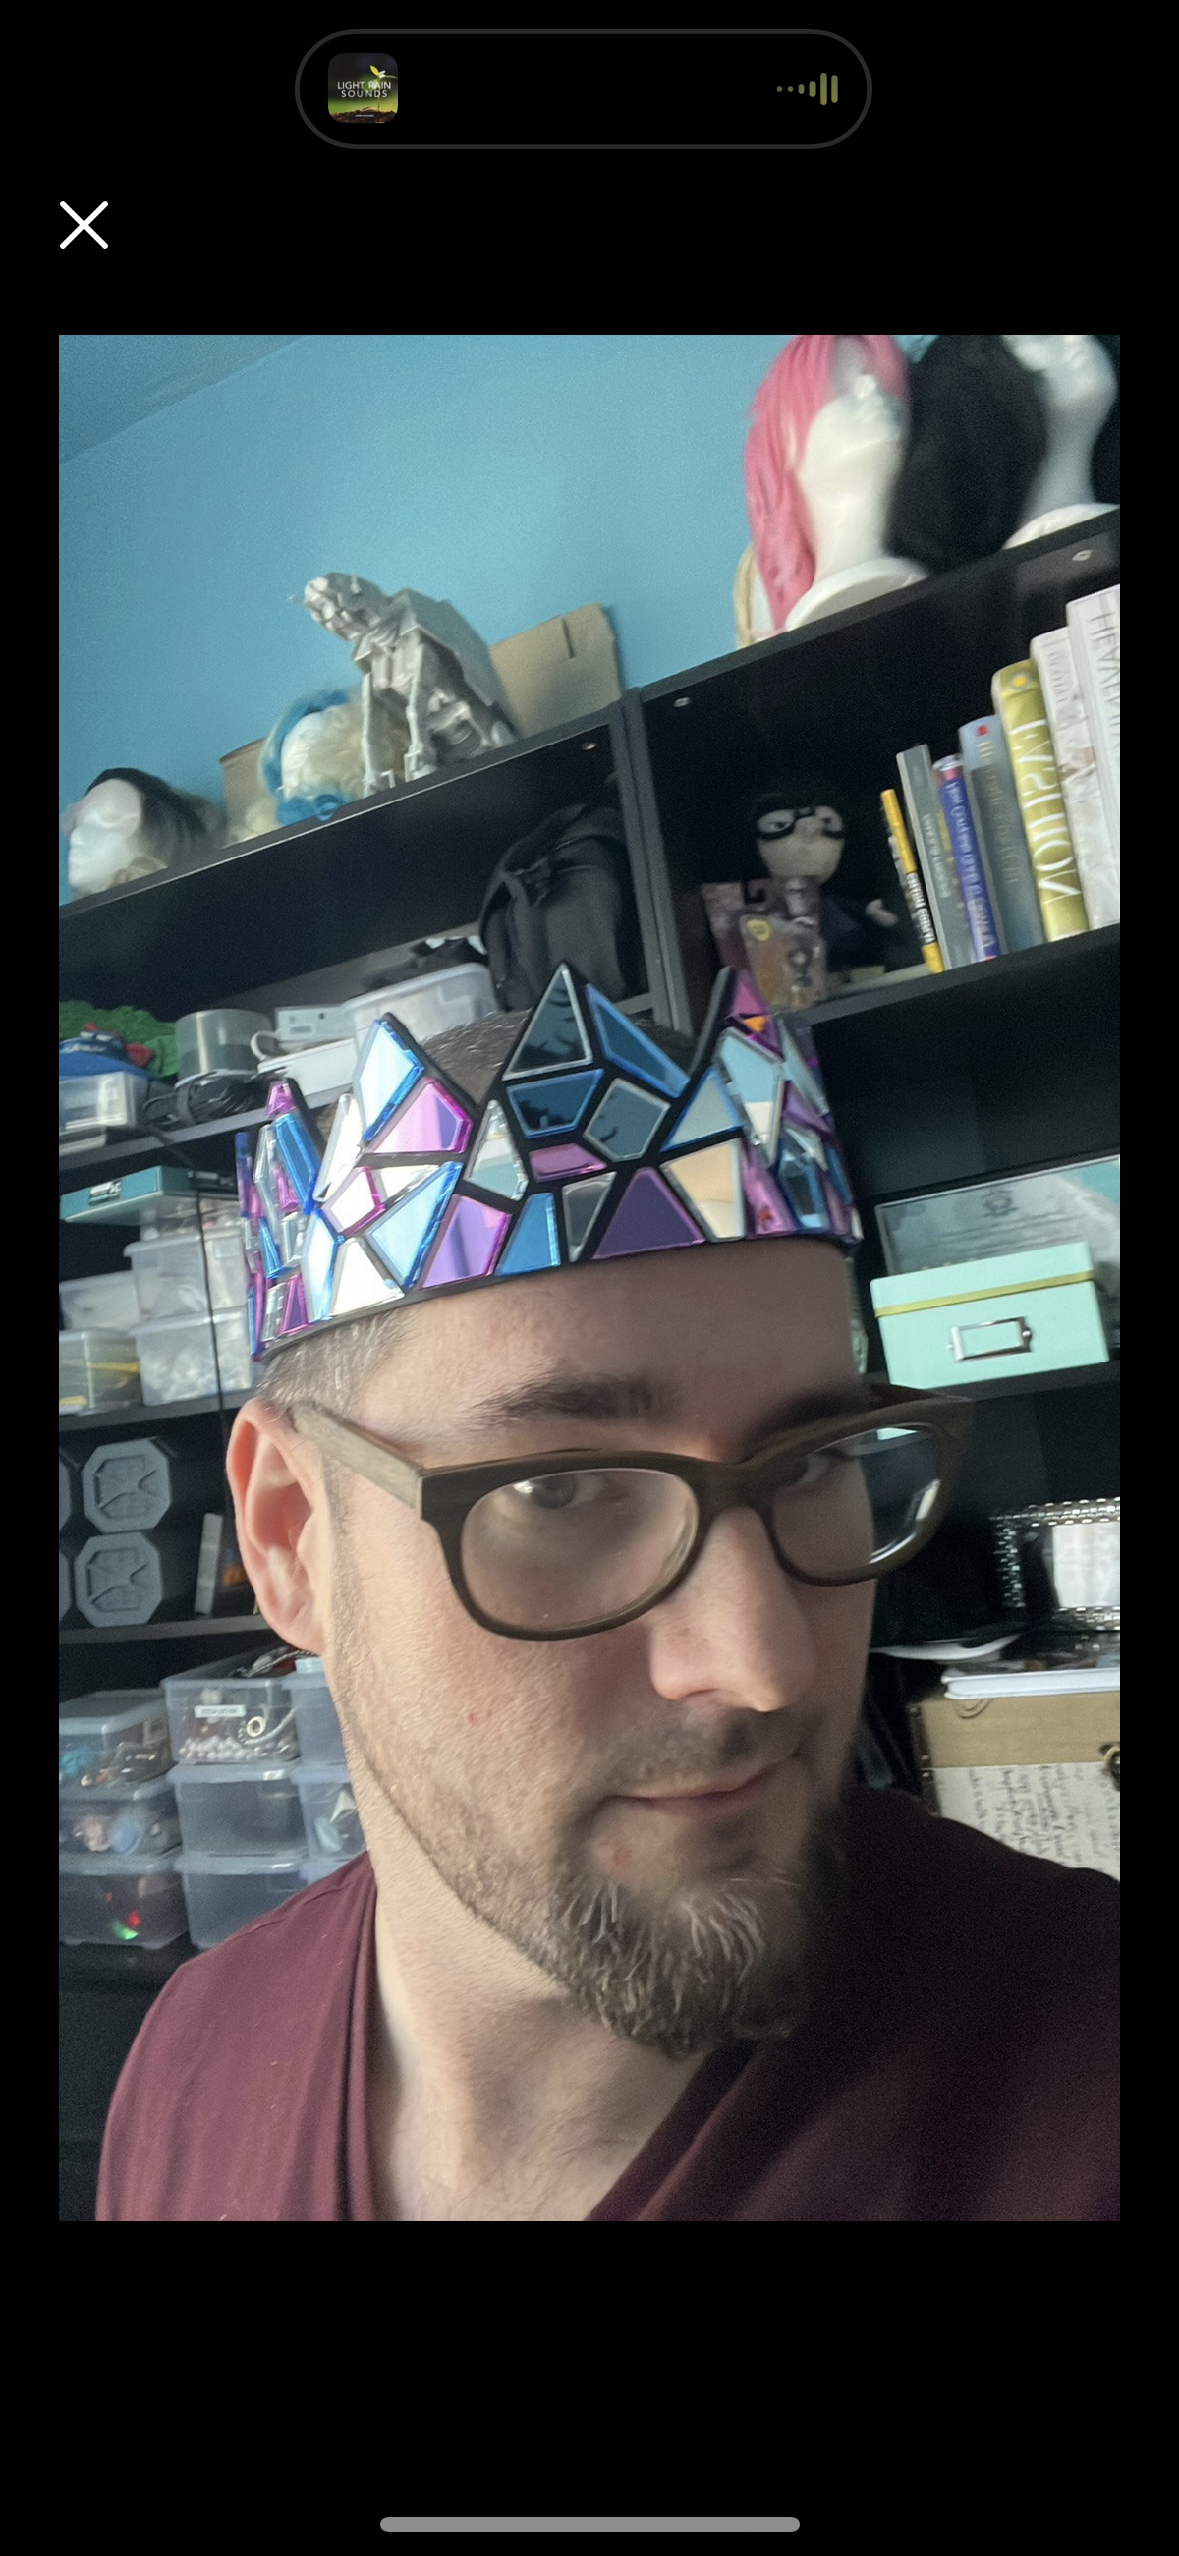 Light Blue and Pink Crown on White/ Black